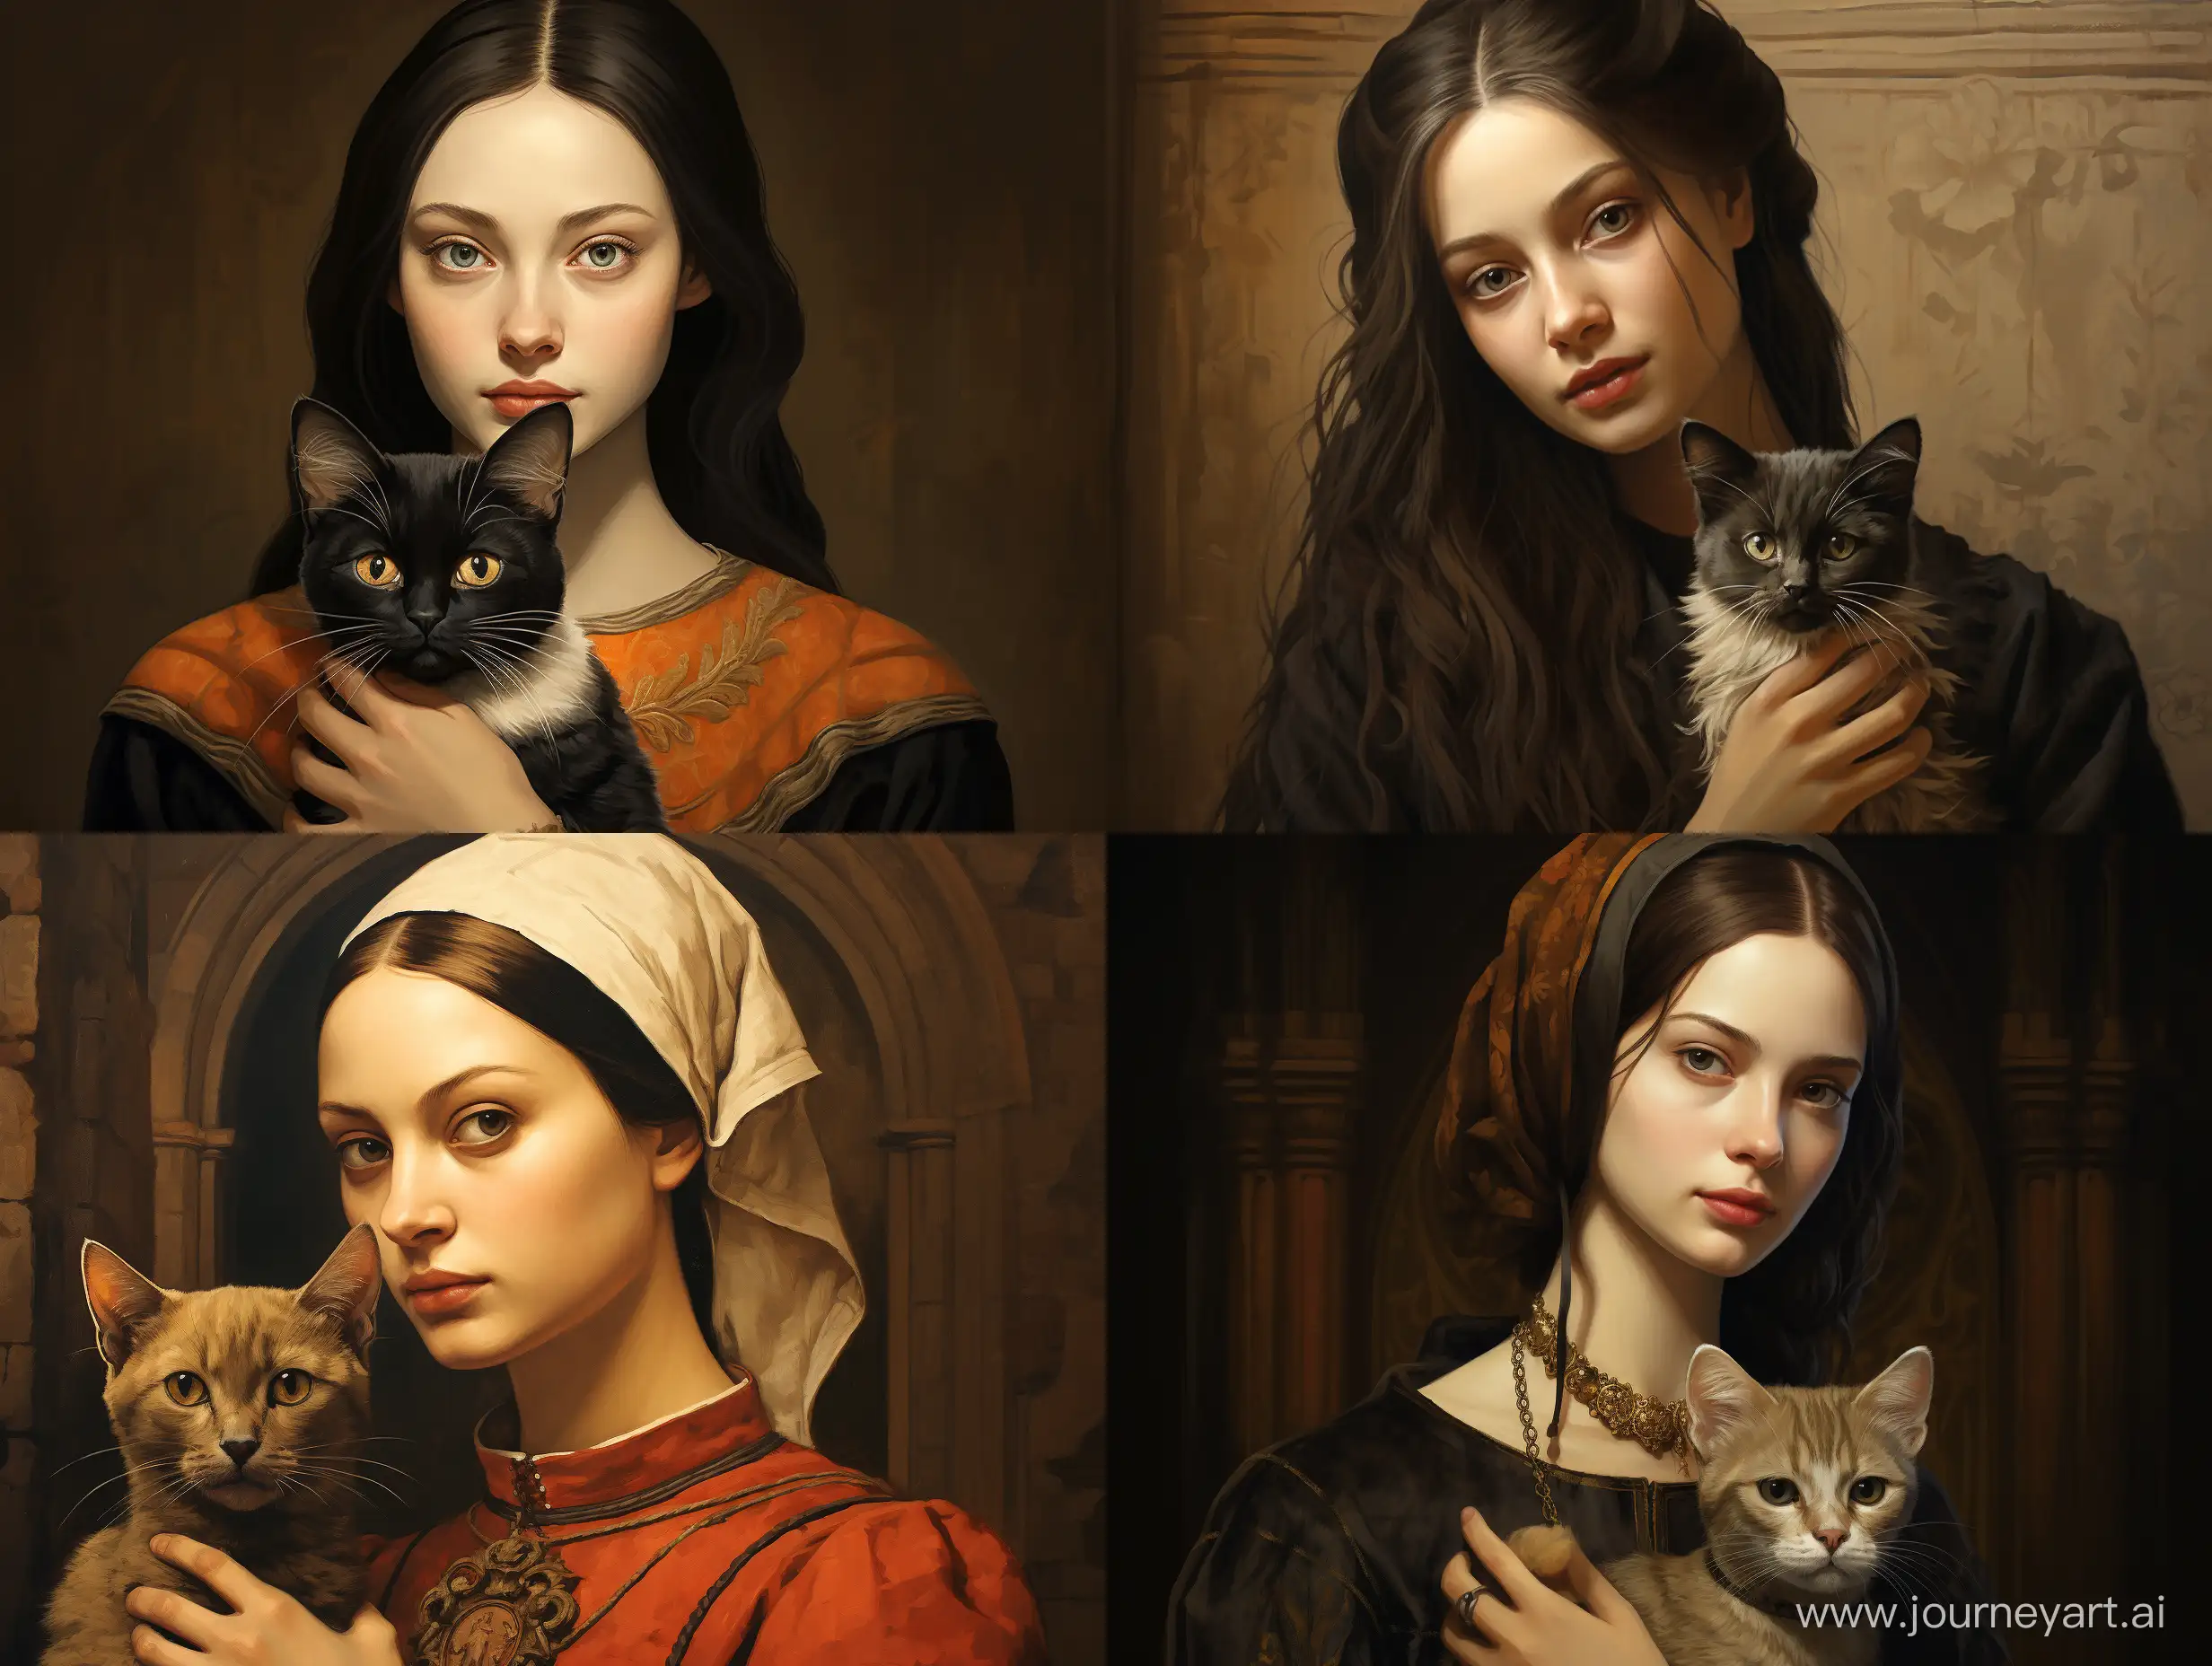 Medieval-Lithography-Portrait-Daria-Kravchuk-Lookalike-with-Siamese-Cat